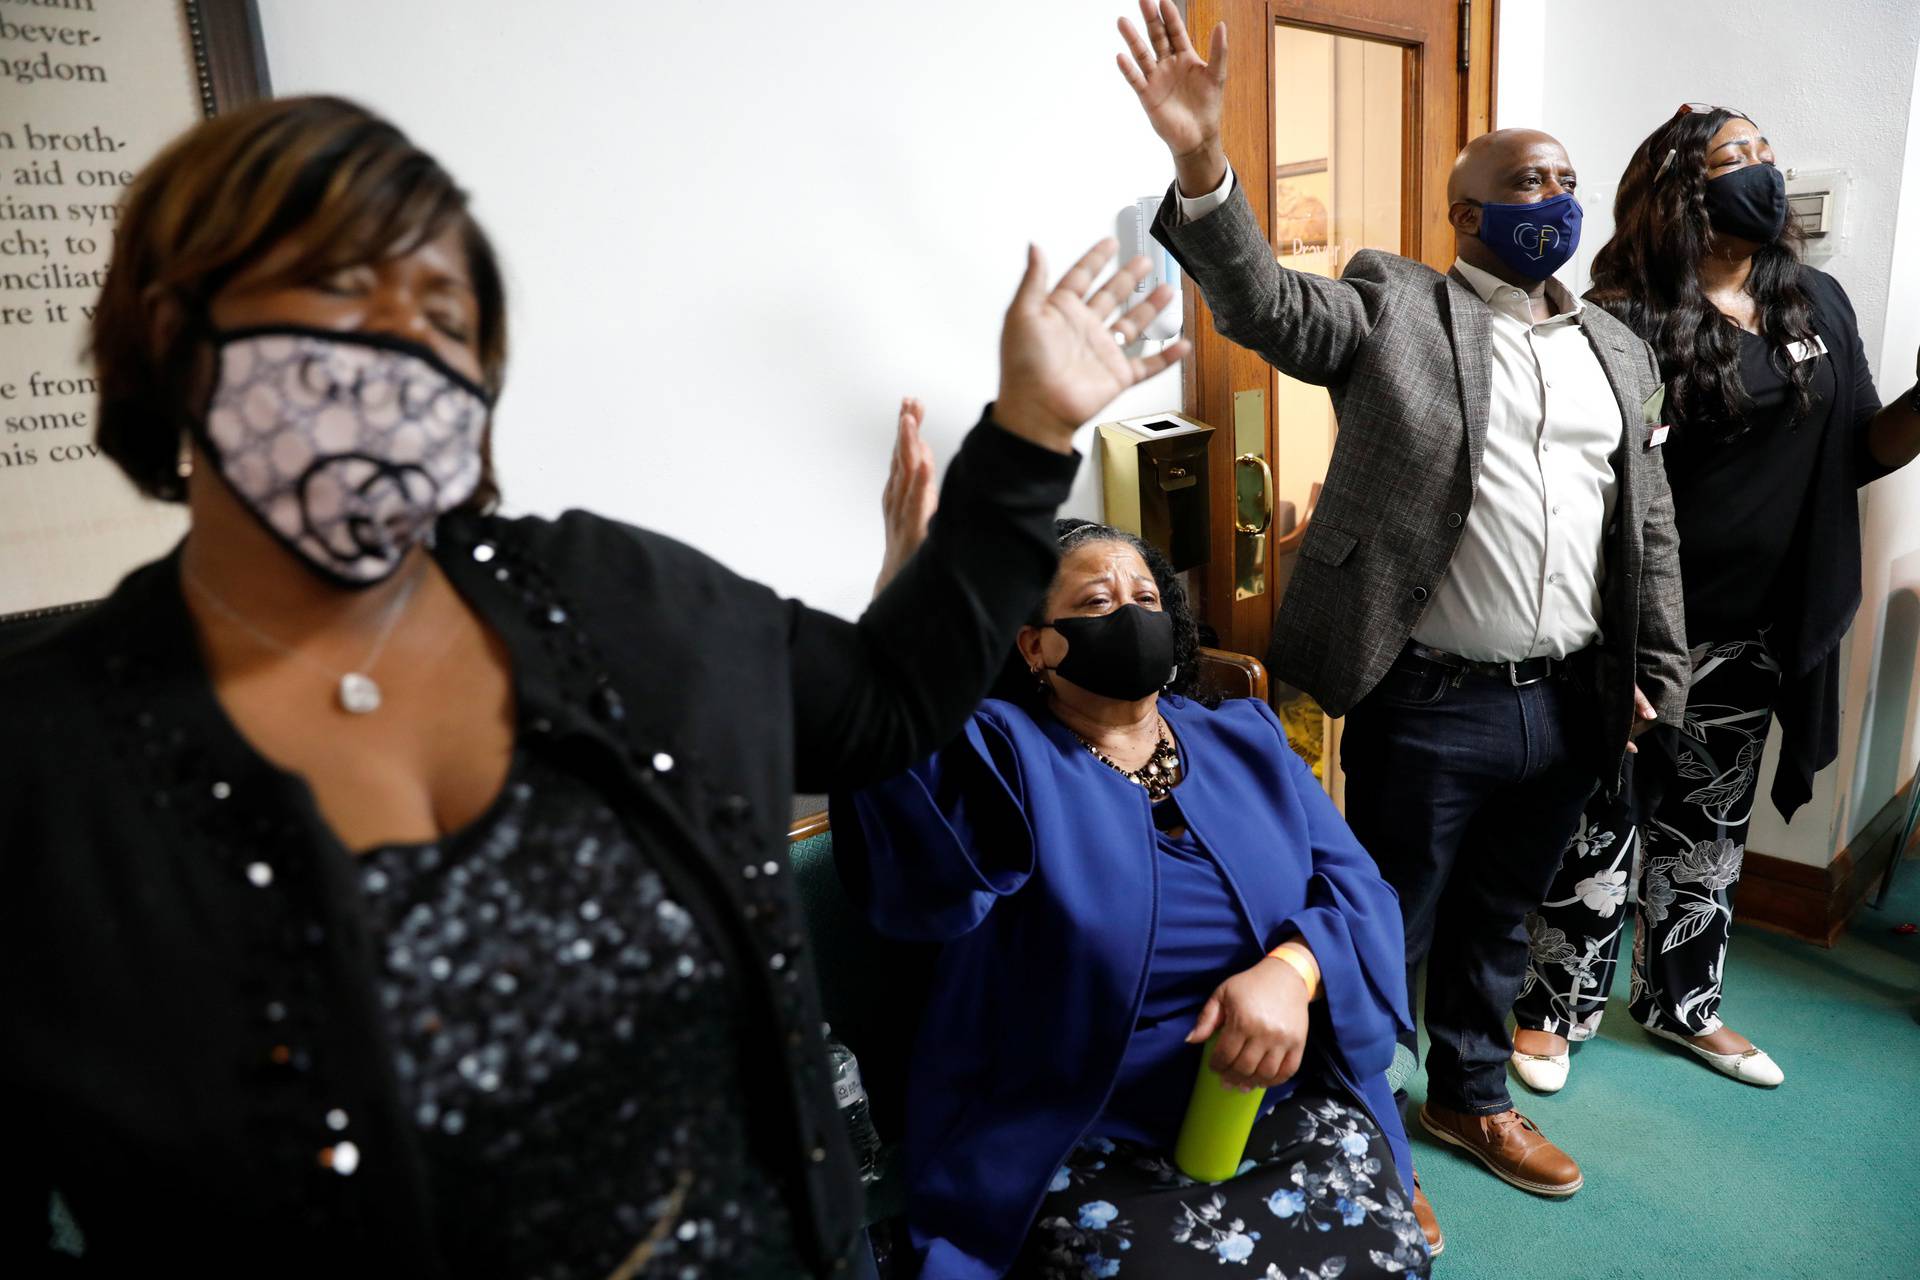 Greater Friendship Missionary Baptist Church members raise their hands in prayer during a vigil the day before opening statements in the trial of former police officer Chauvin, who is facing murder charges in the death of Floyd, in Minneapolis